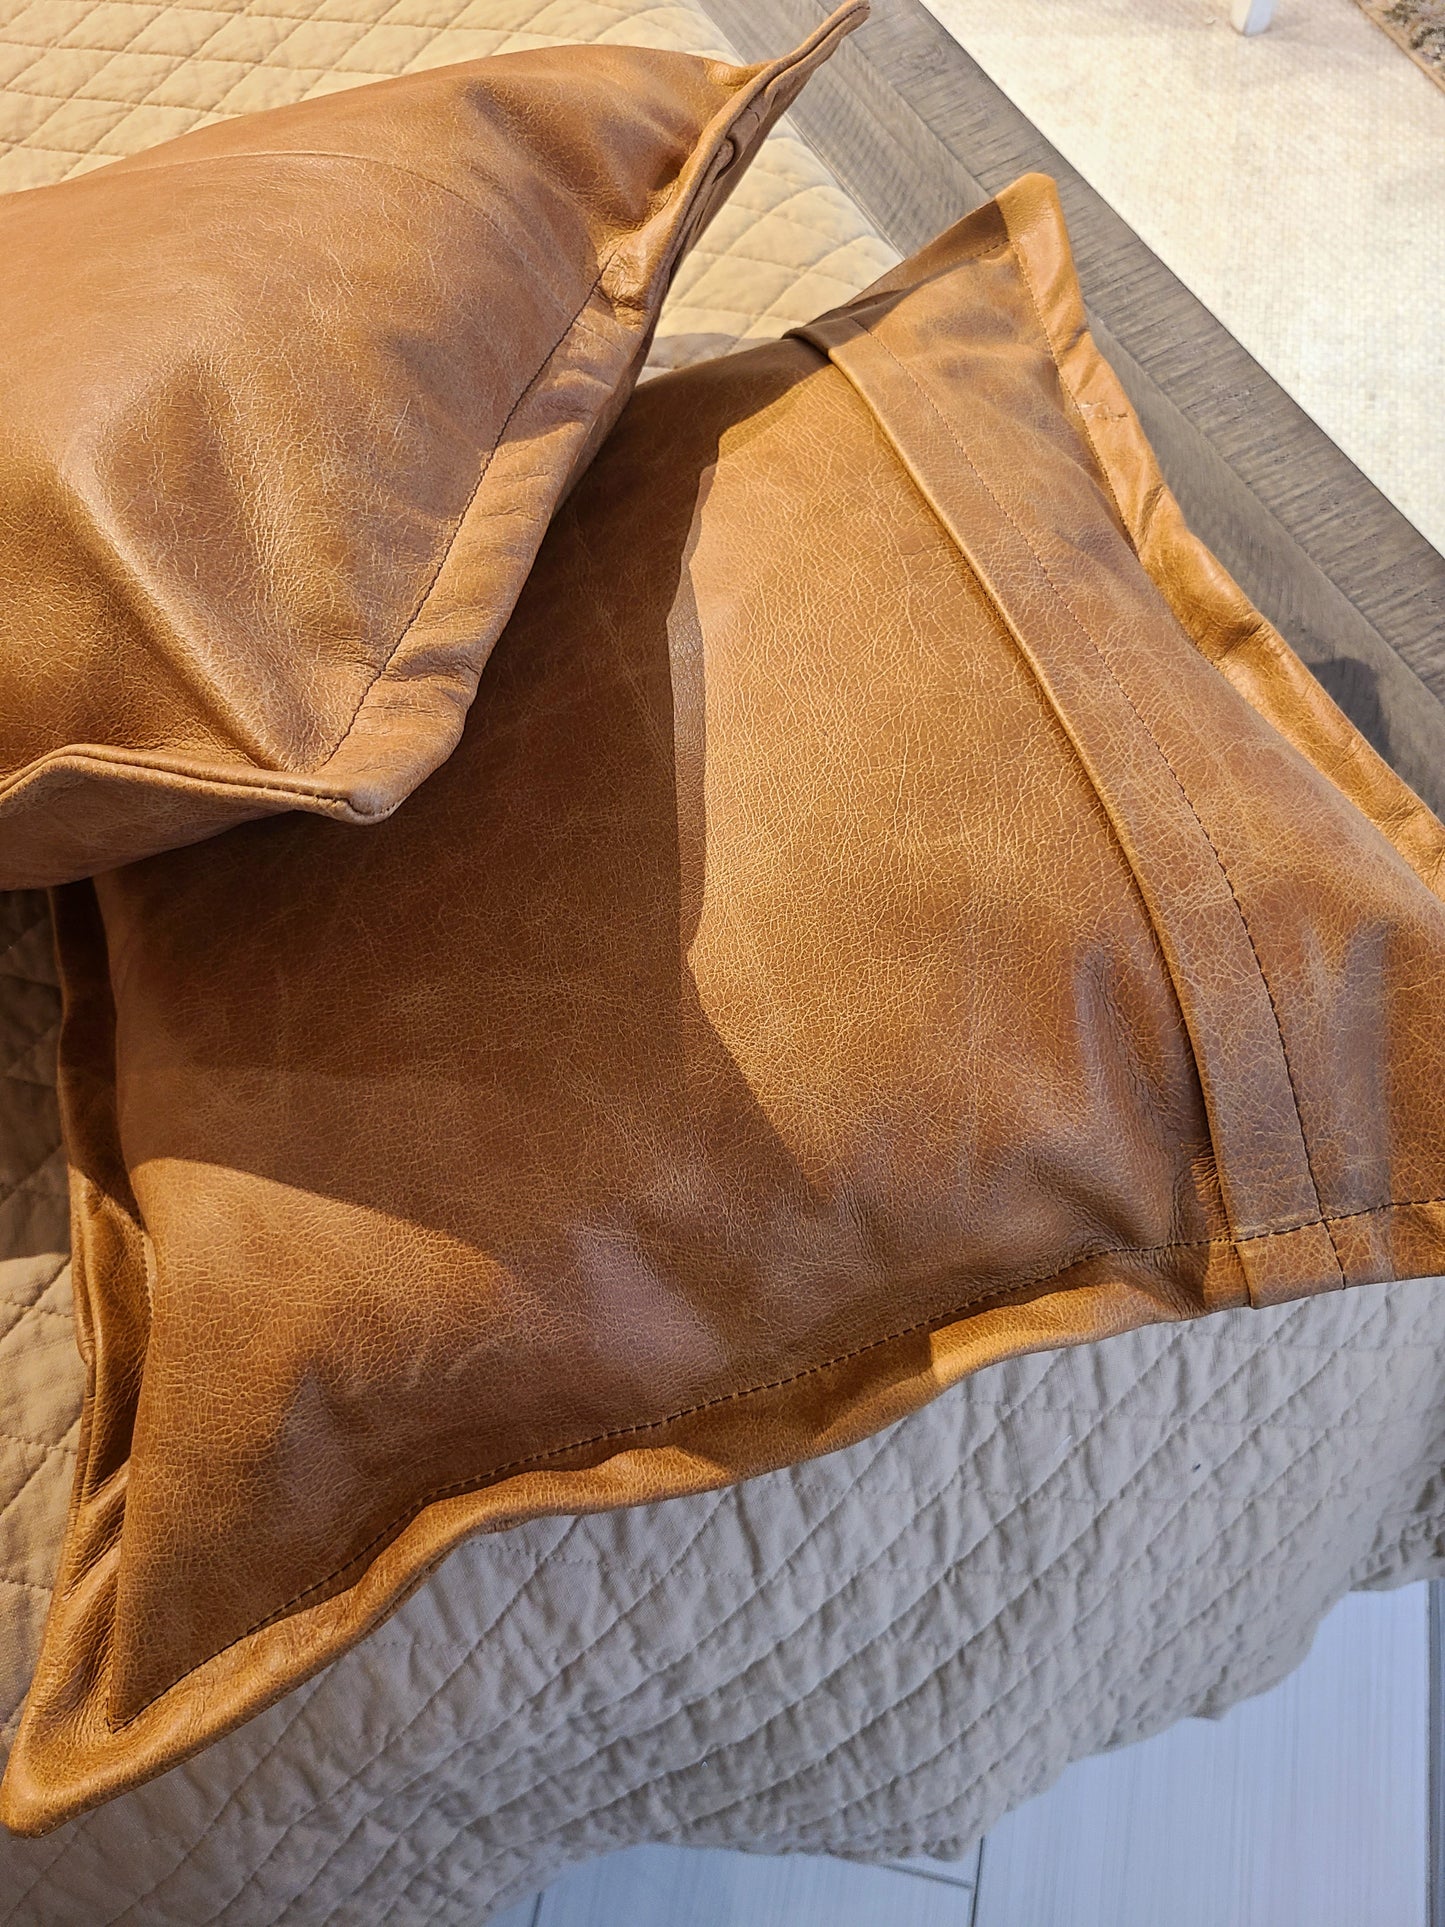 100% Lambskin Leather Caramel Brown Throw Pillow Cover - 16 x 16-Status Co. Leather Studio